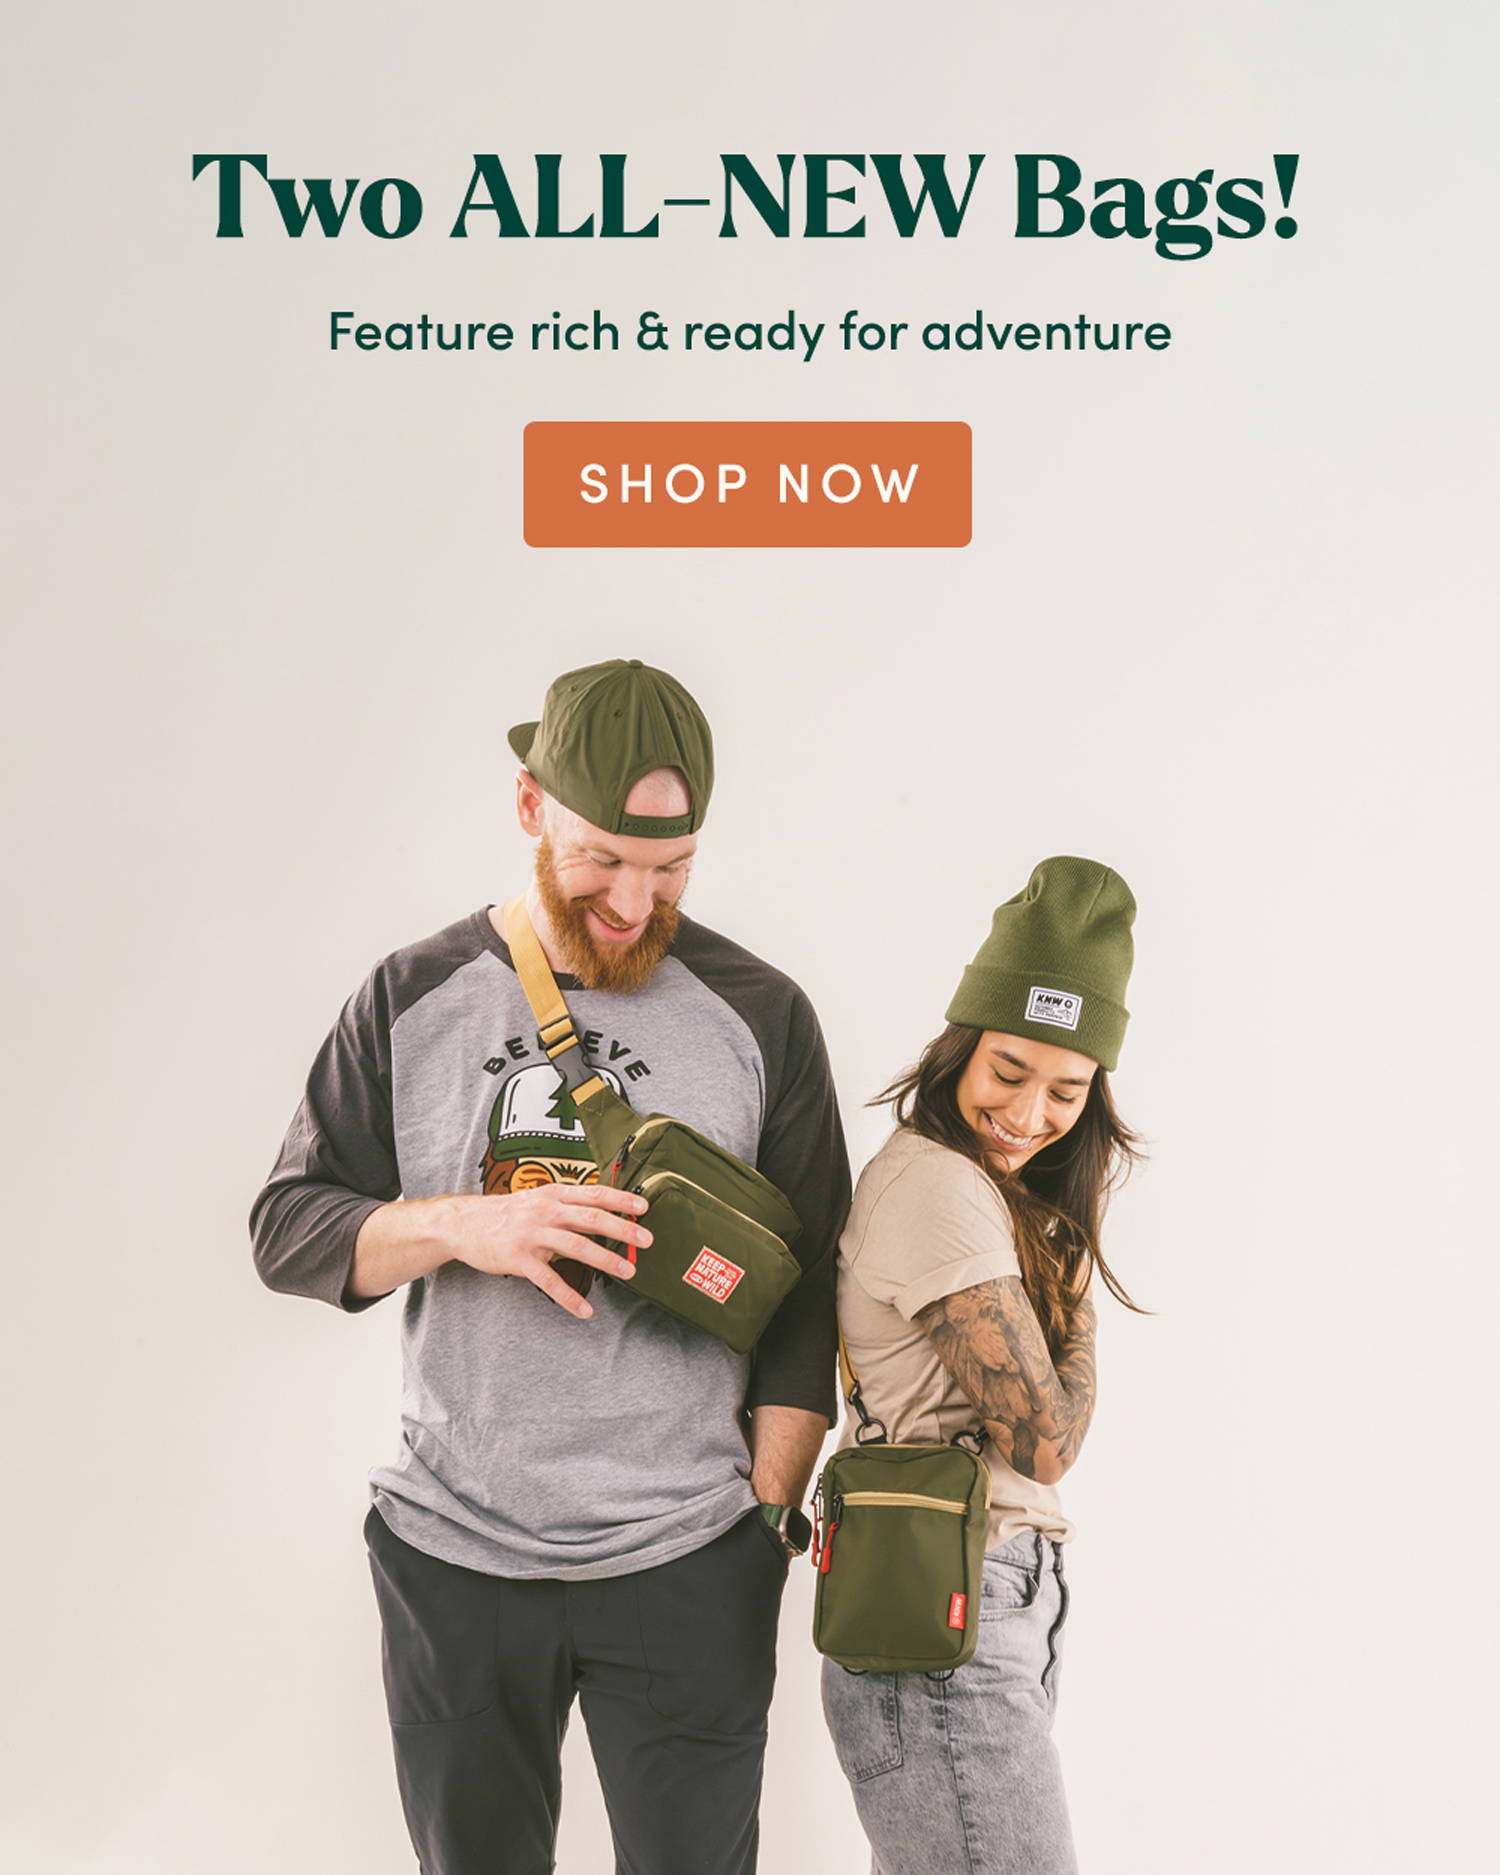 Two ALL-NEW Bags! Feature rich & ready for adventure. Shop Now! 